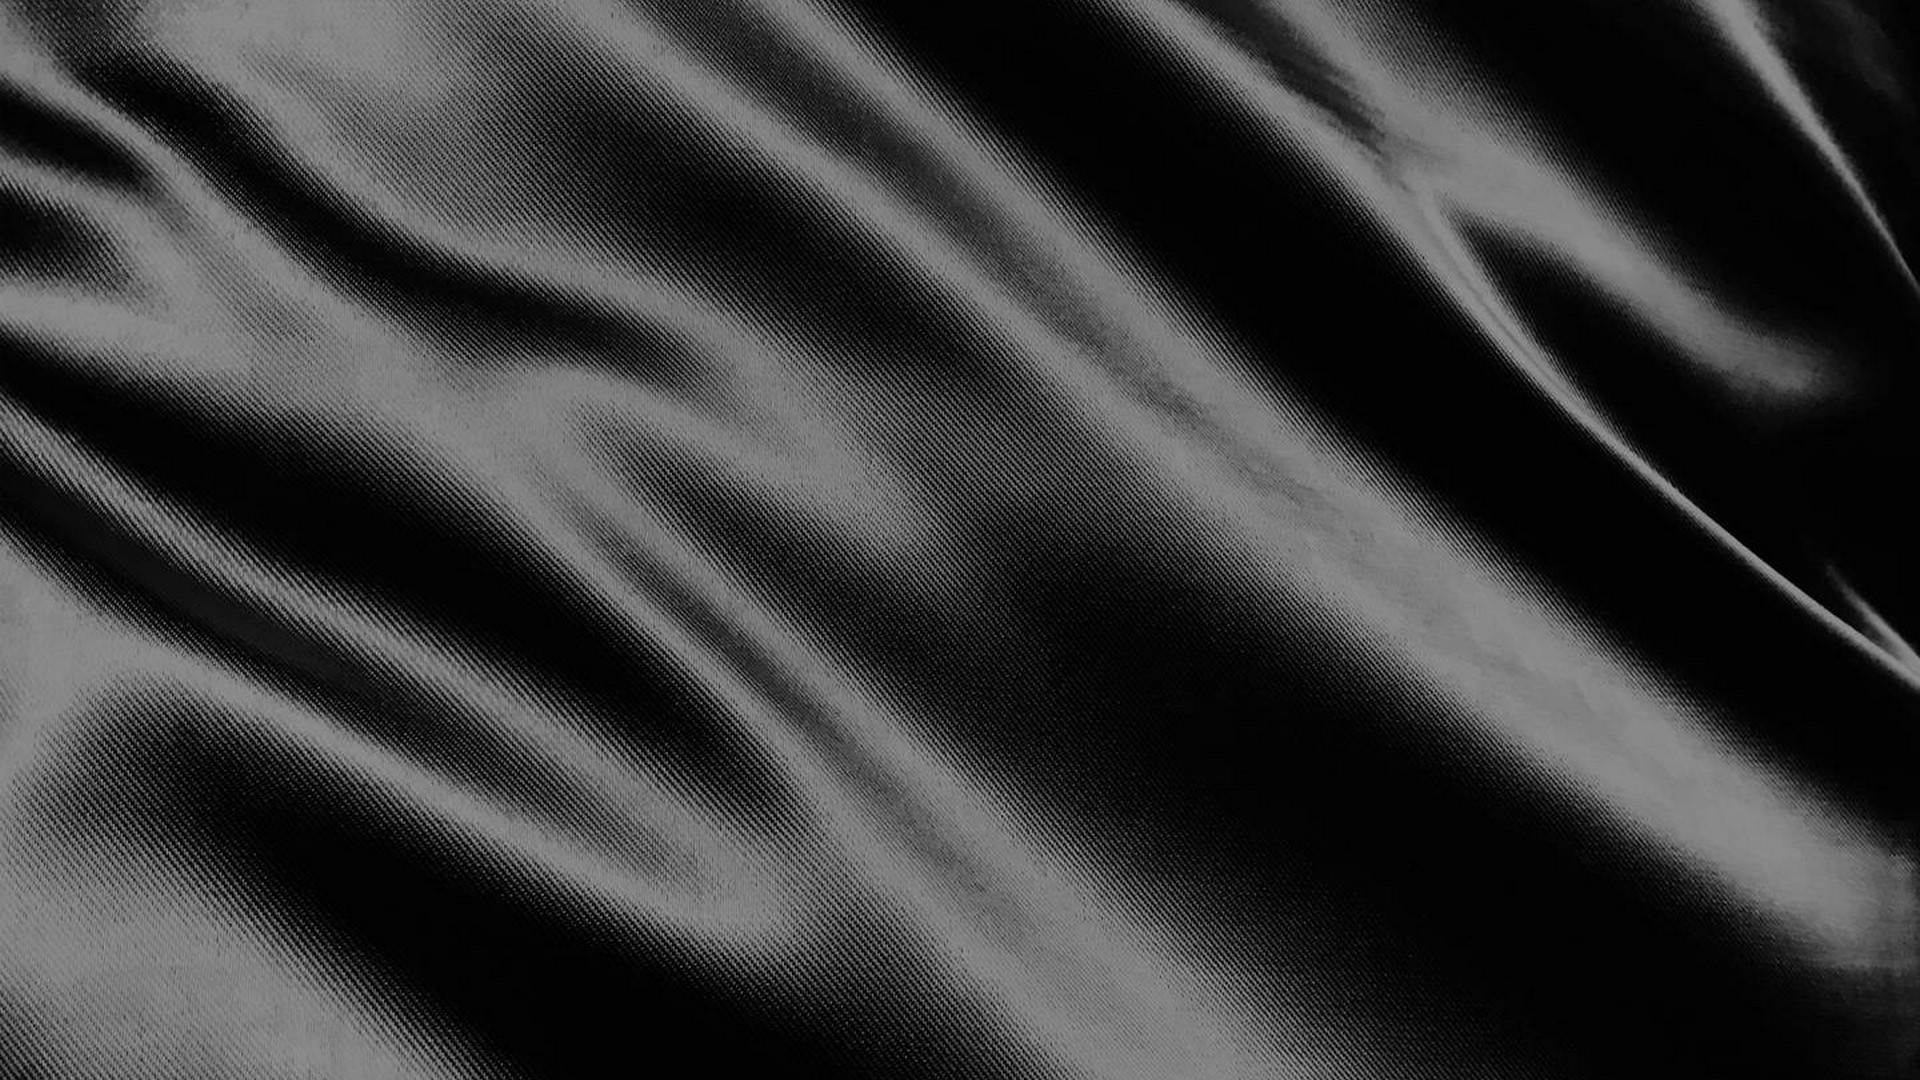 Wallpapers iPhone Black Silk with high-resolution 1920x1080 pixel. You can use this wallpaper for your iPhone 5, 6, 7, 8, X, XS, XR backgrounds, Mobile Screensaver, or iPad Lock Screen